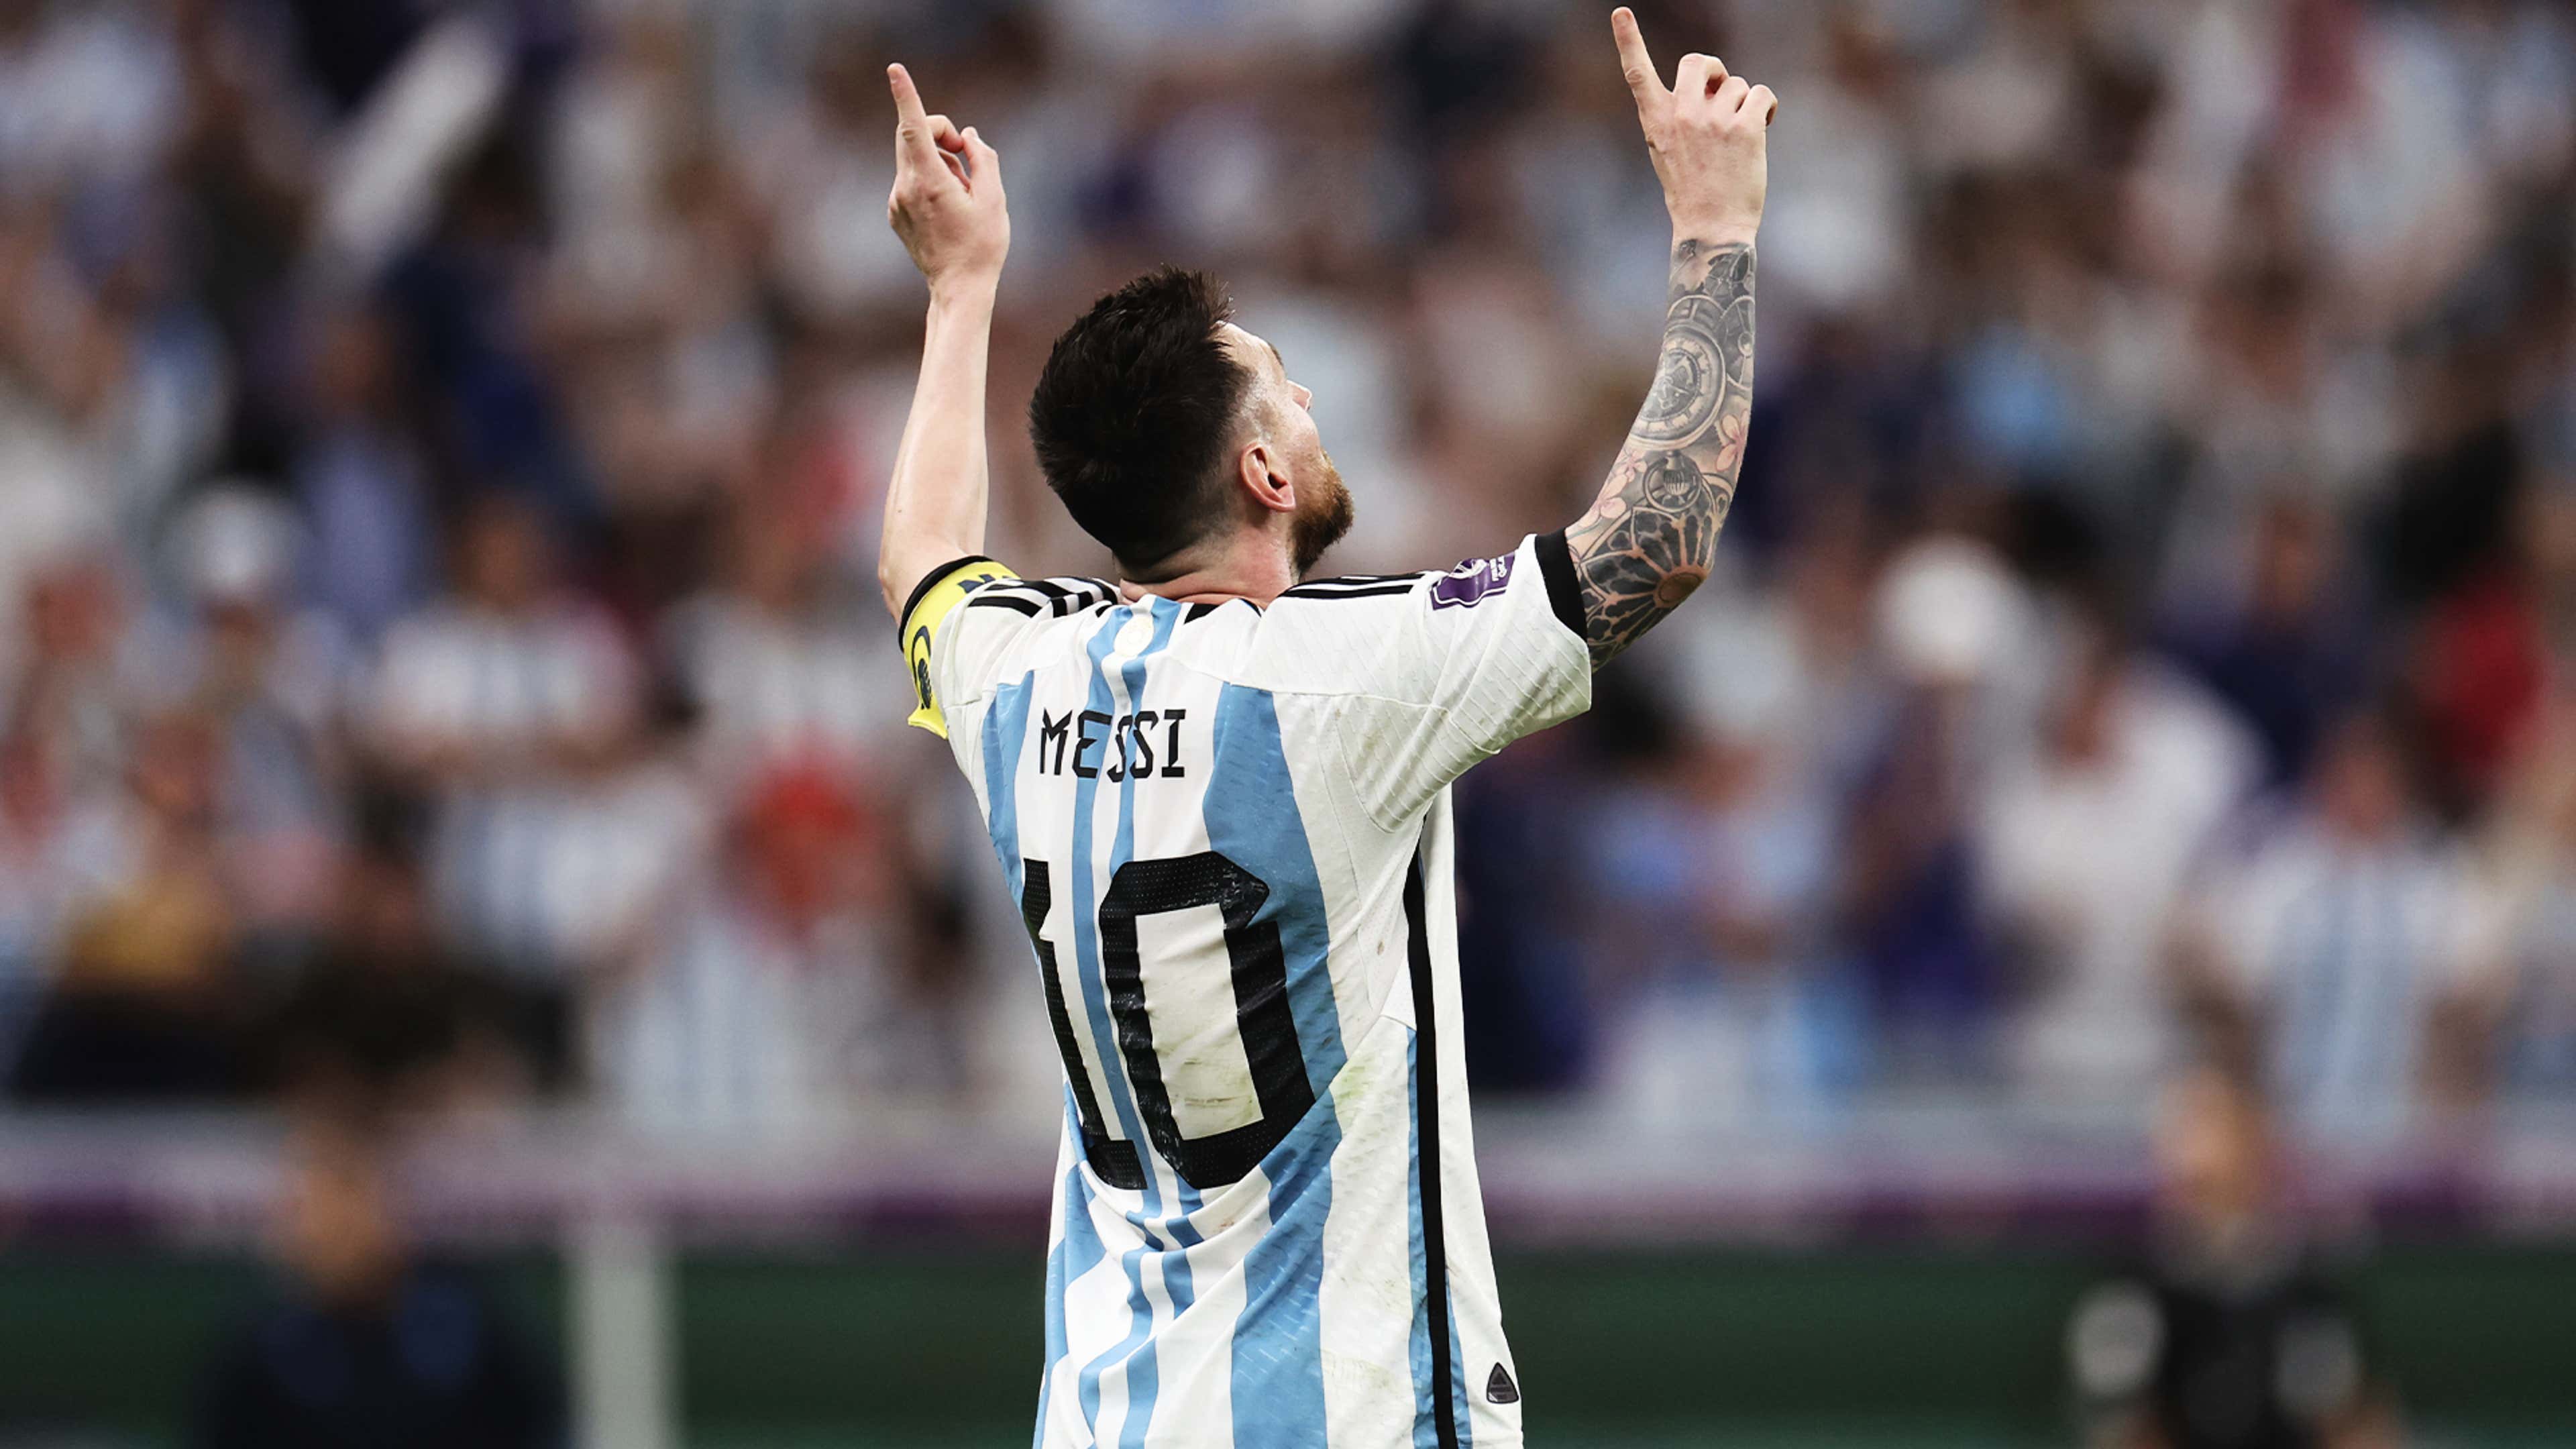 world cup jersey argentina